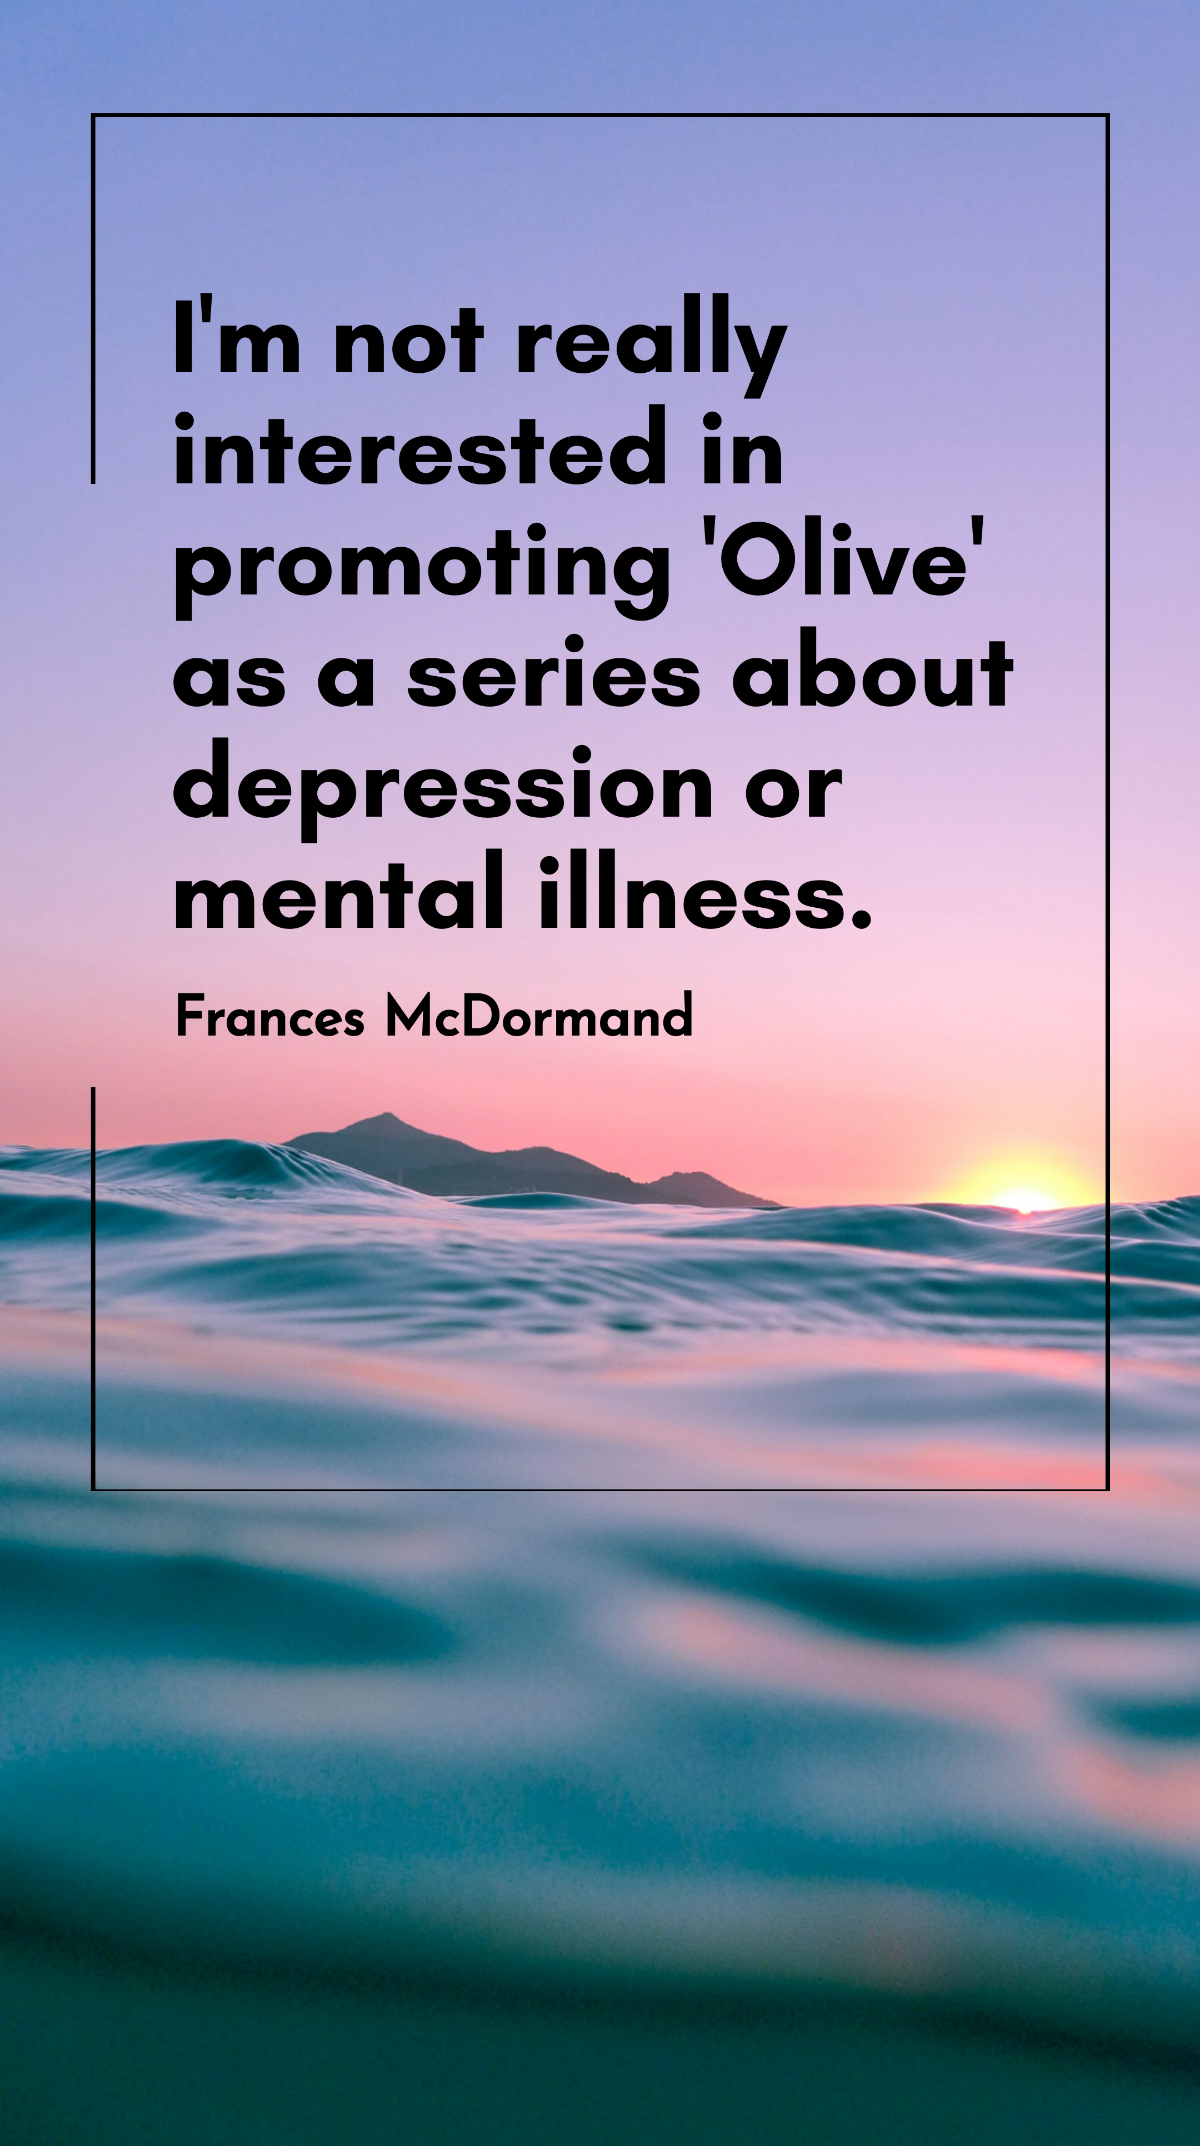 Frances McDormand - I'm not really interested in promoting 'Olive' as a series about depression or mental illness. Template